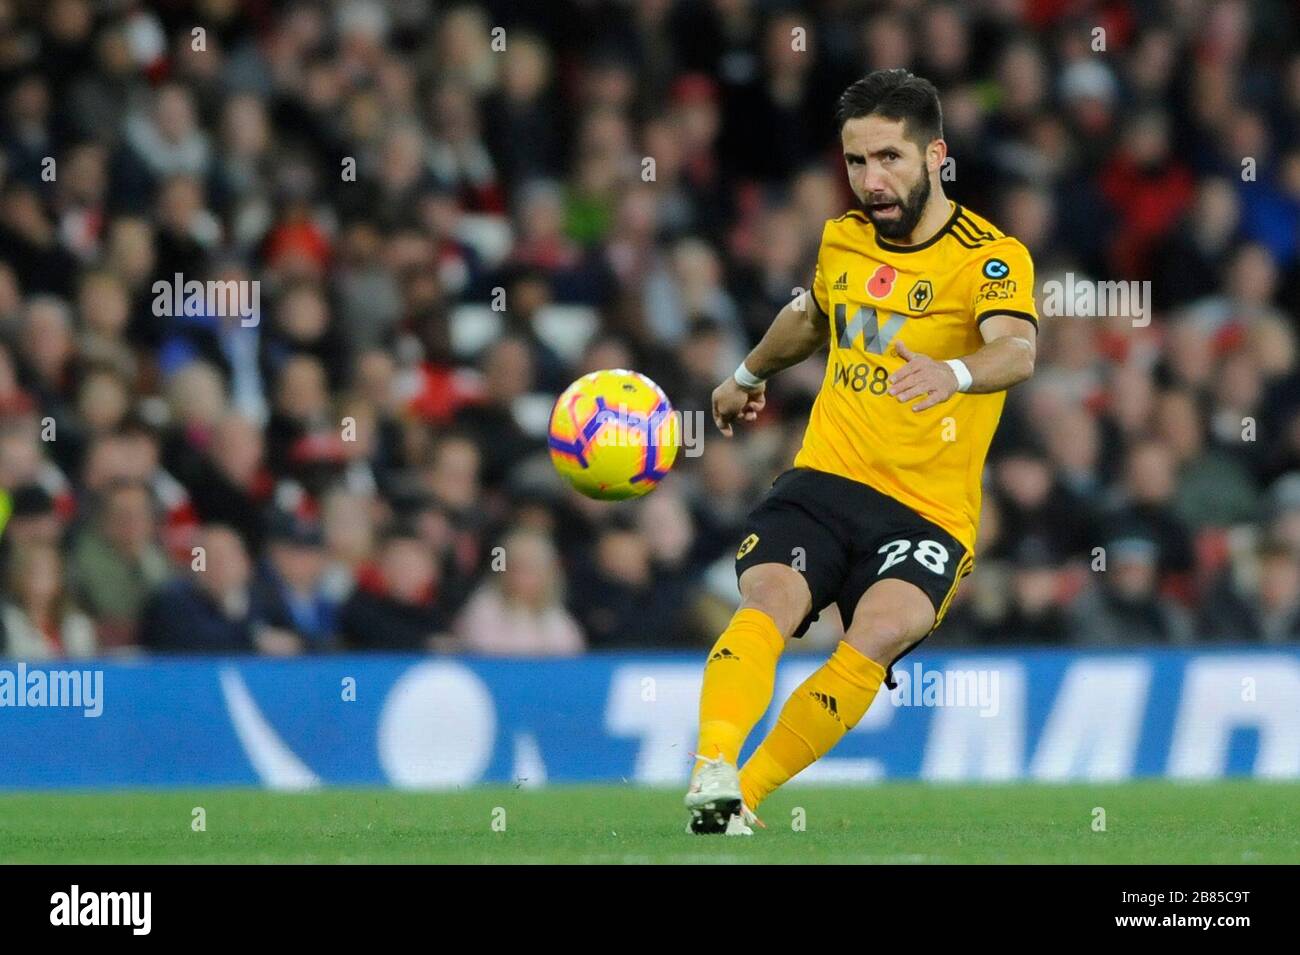 Joāo Moutinho of Wolverhampton Wanderers in action during the Premier League match between Arsenal and Wolverhampton Wanderers at Emirates Stadium in London, UK - 11th November 2018 Stock Photo